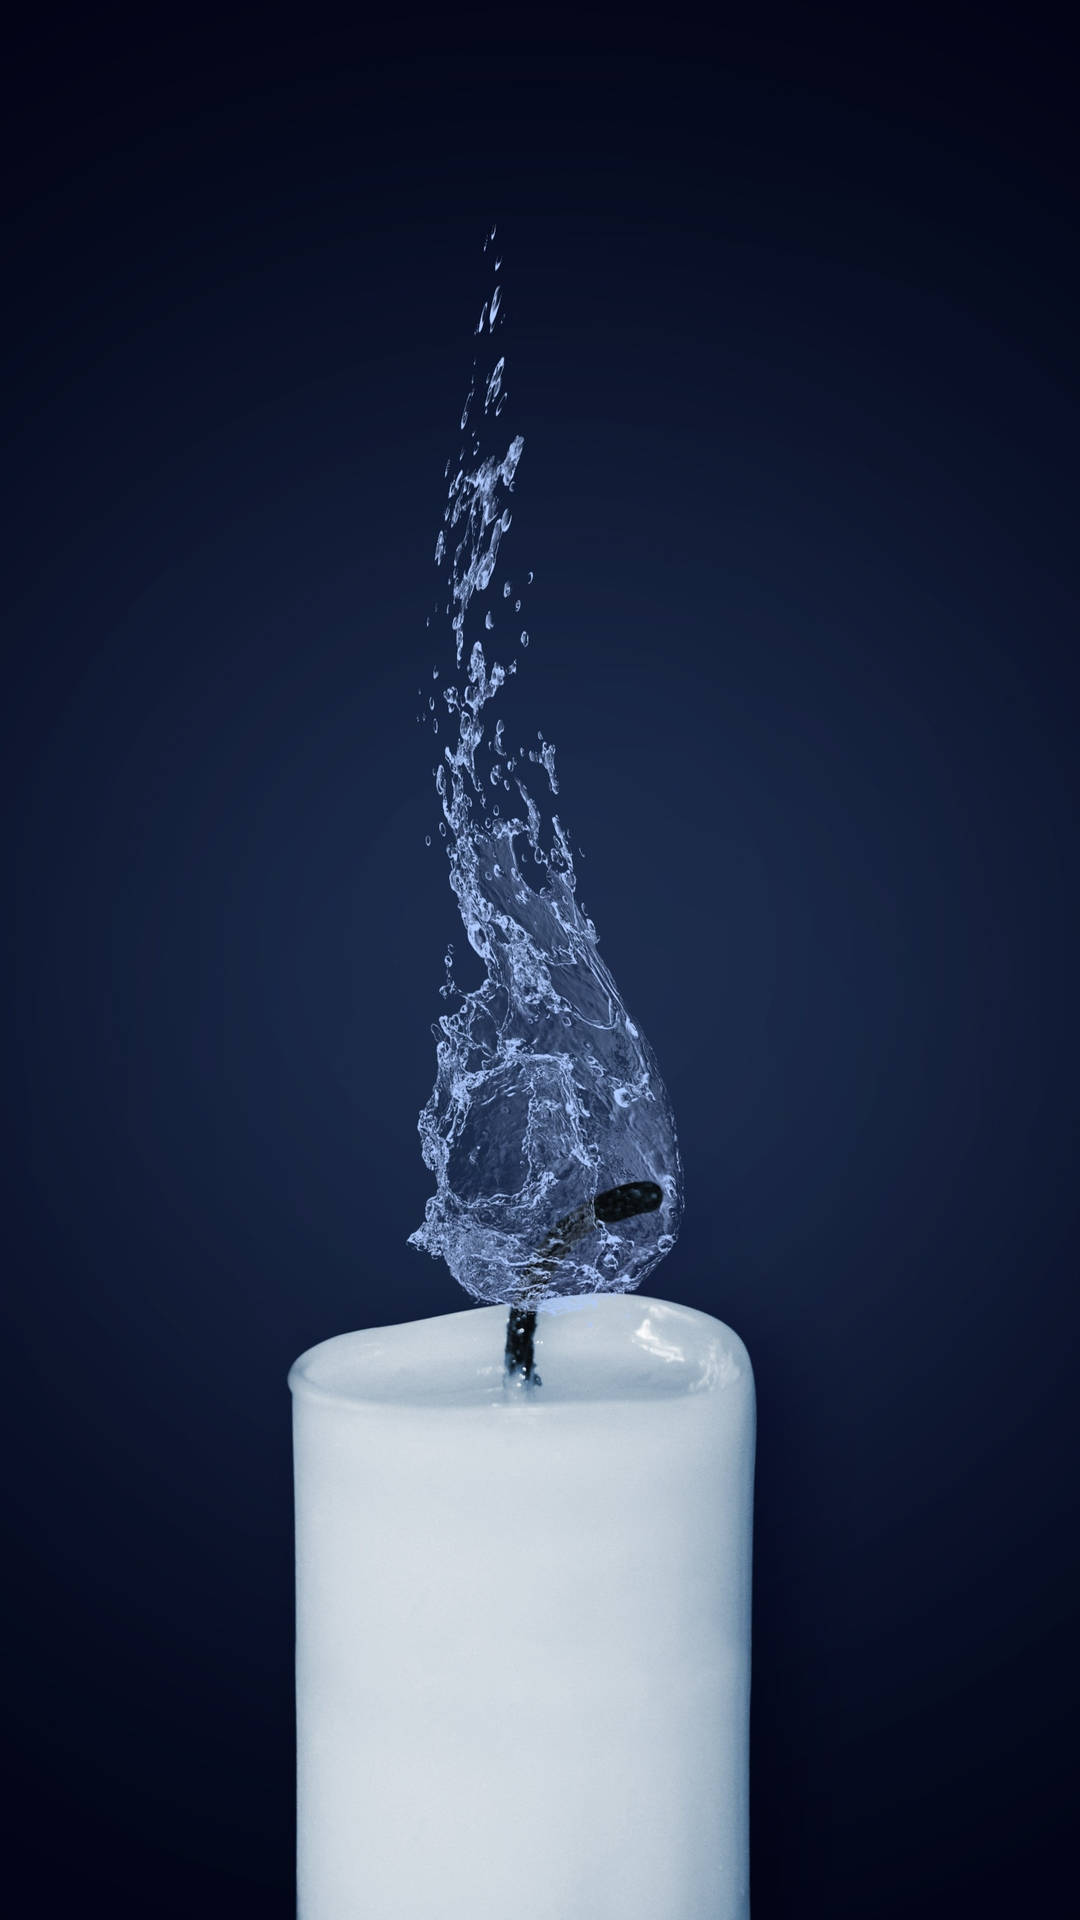 Candle With Water Flame 2160x3840 Wallpaper